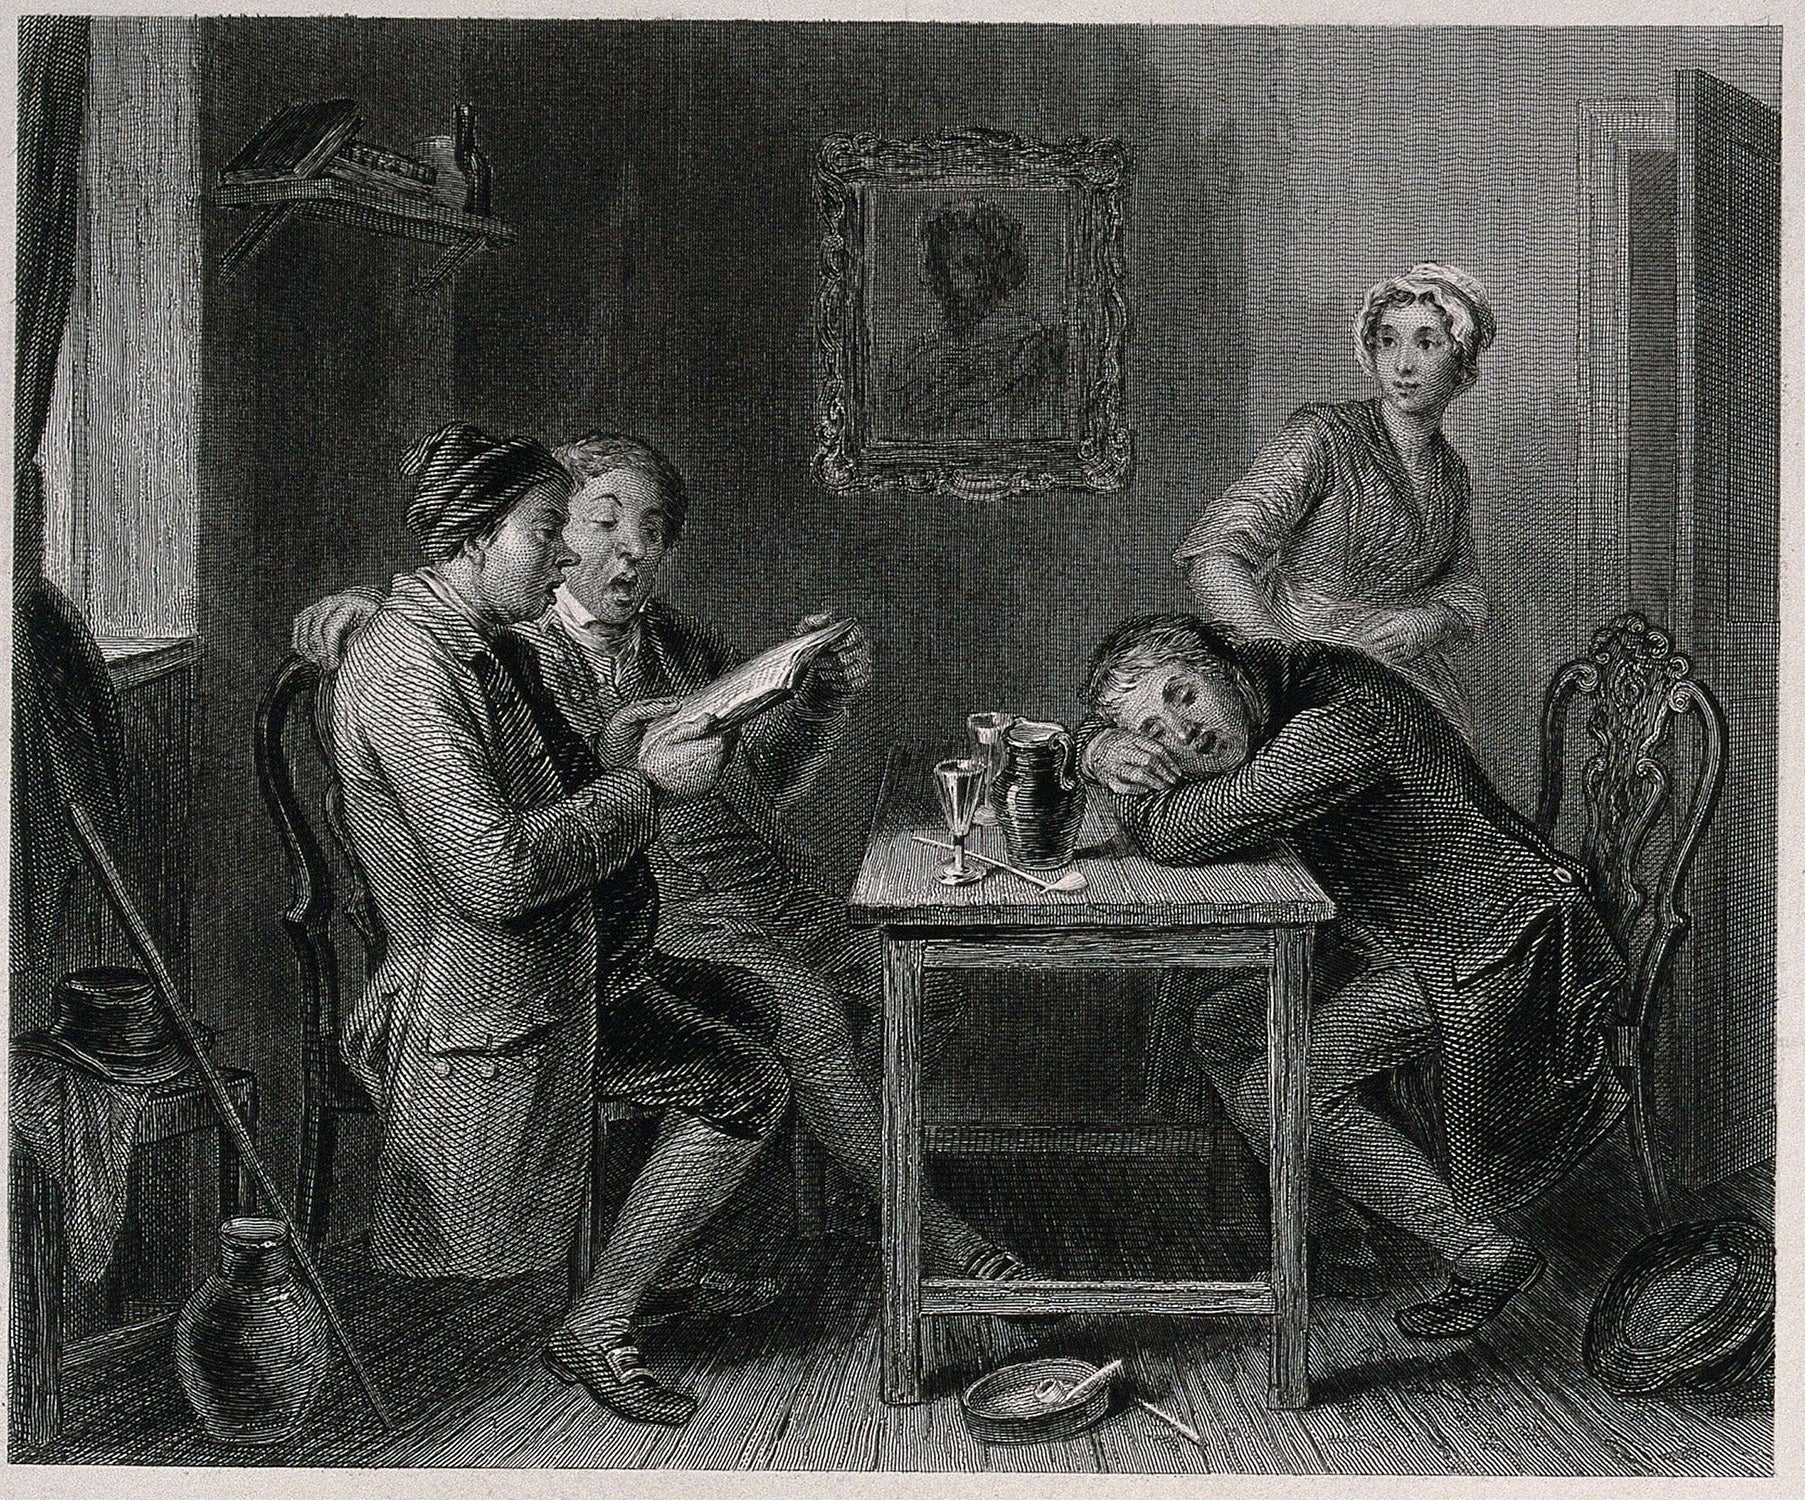 Two men sing from a songbook they are both holding, while a younger man has fallen asleep at the table; a young woman looks on